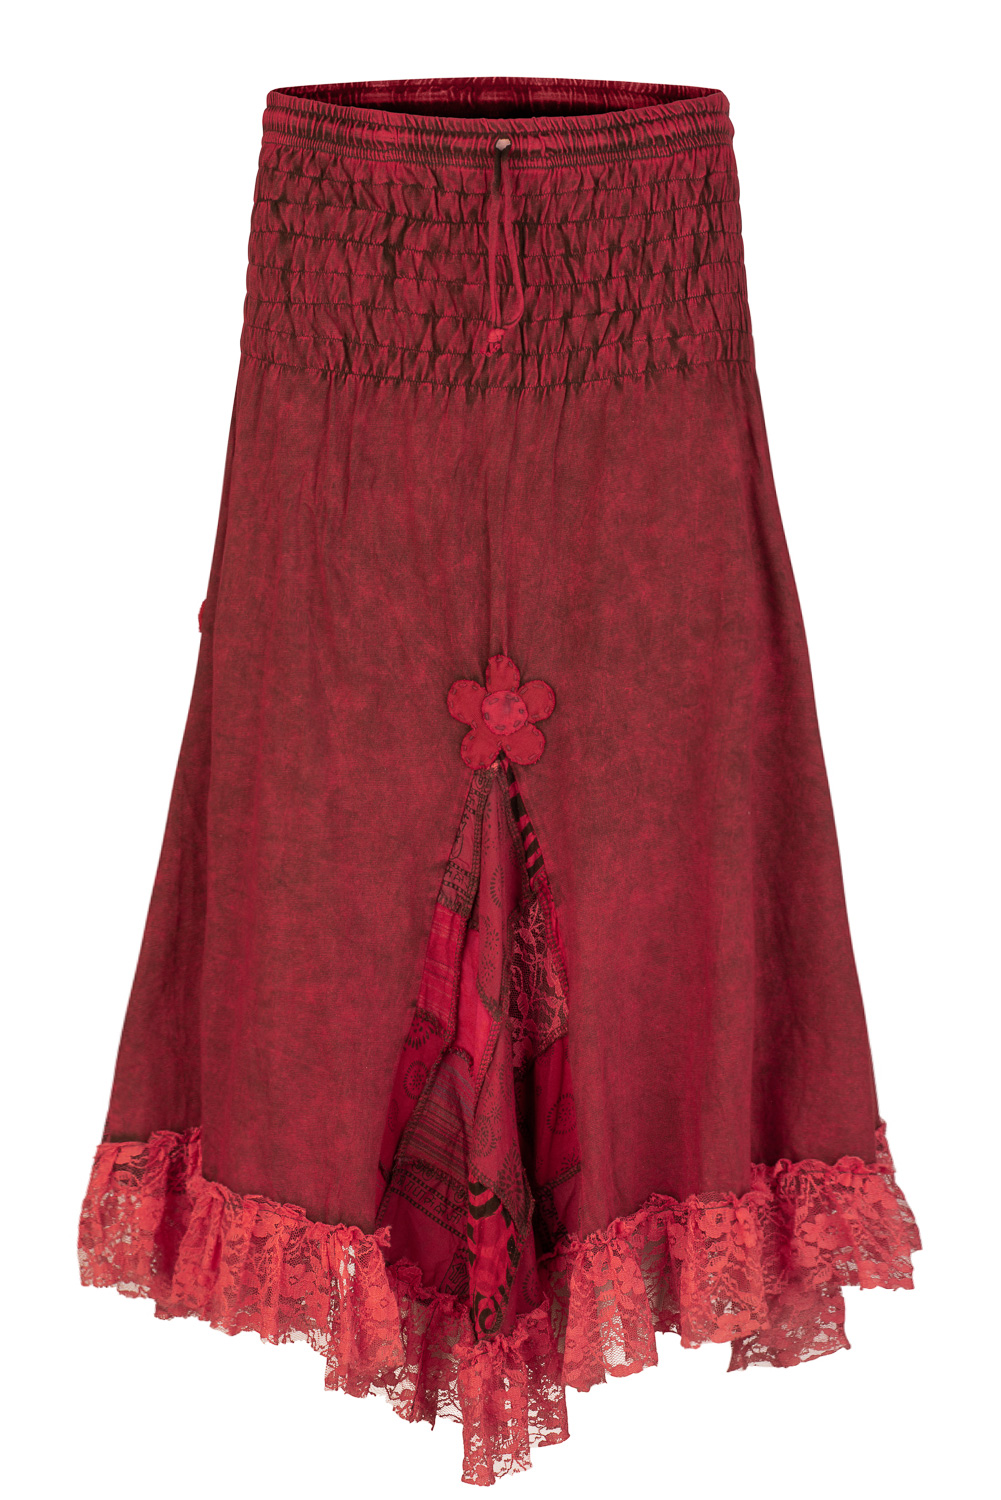 Wicked Dragon Clothing - Boho skirt with patchwork & lace